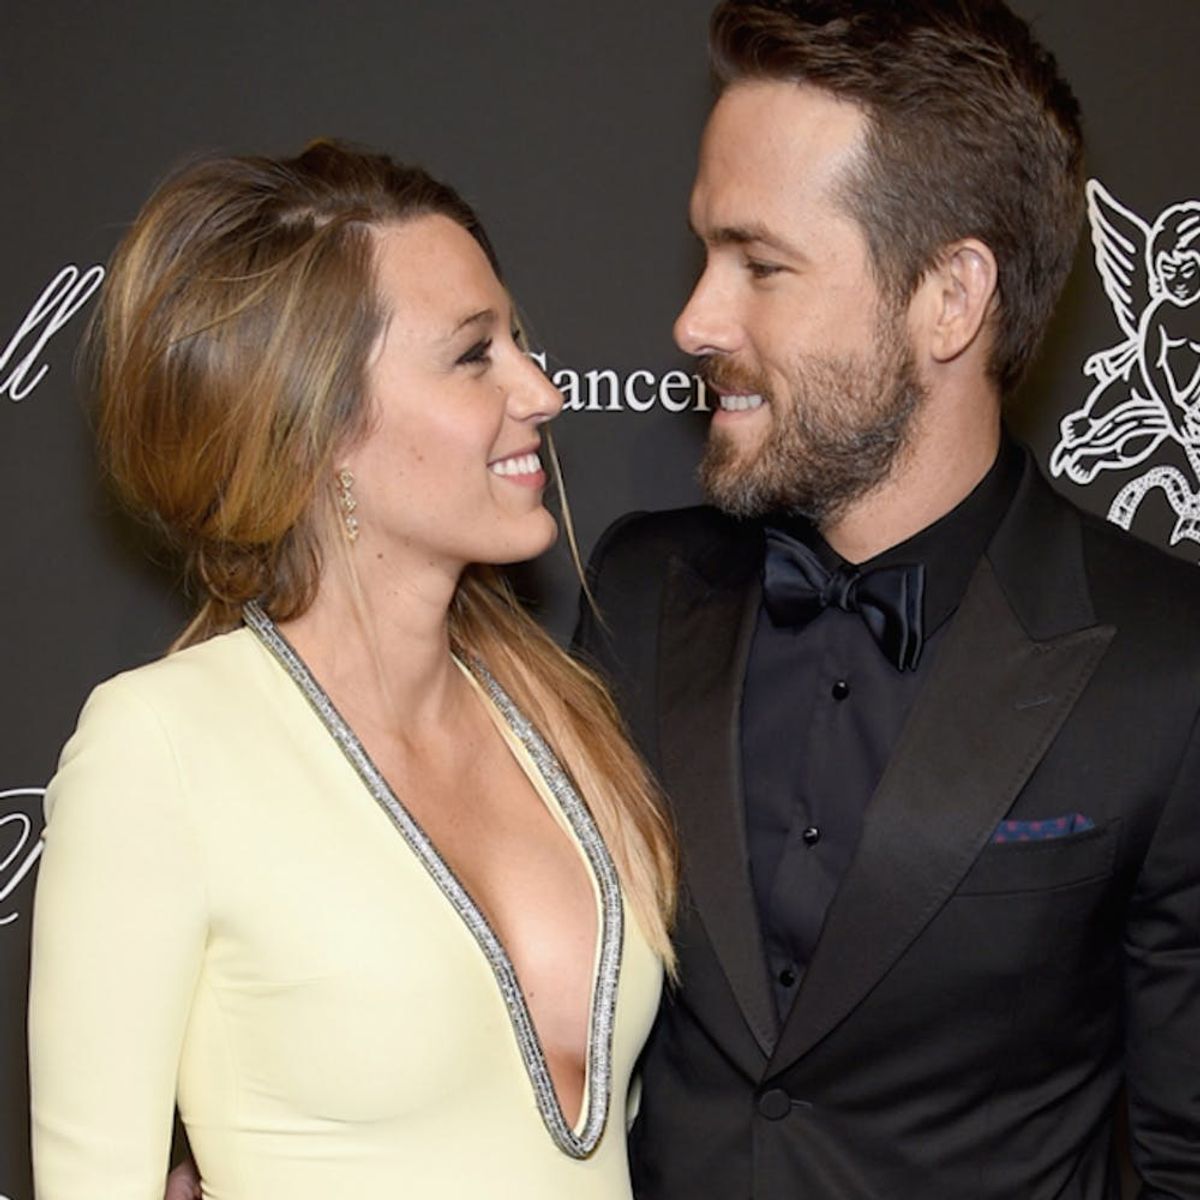 Blake Lively and Ryan Reynolds Define #RelationshipGoals in This Adorable Instagram